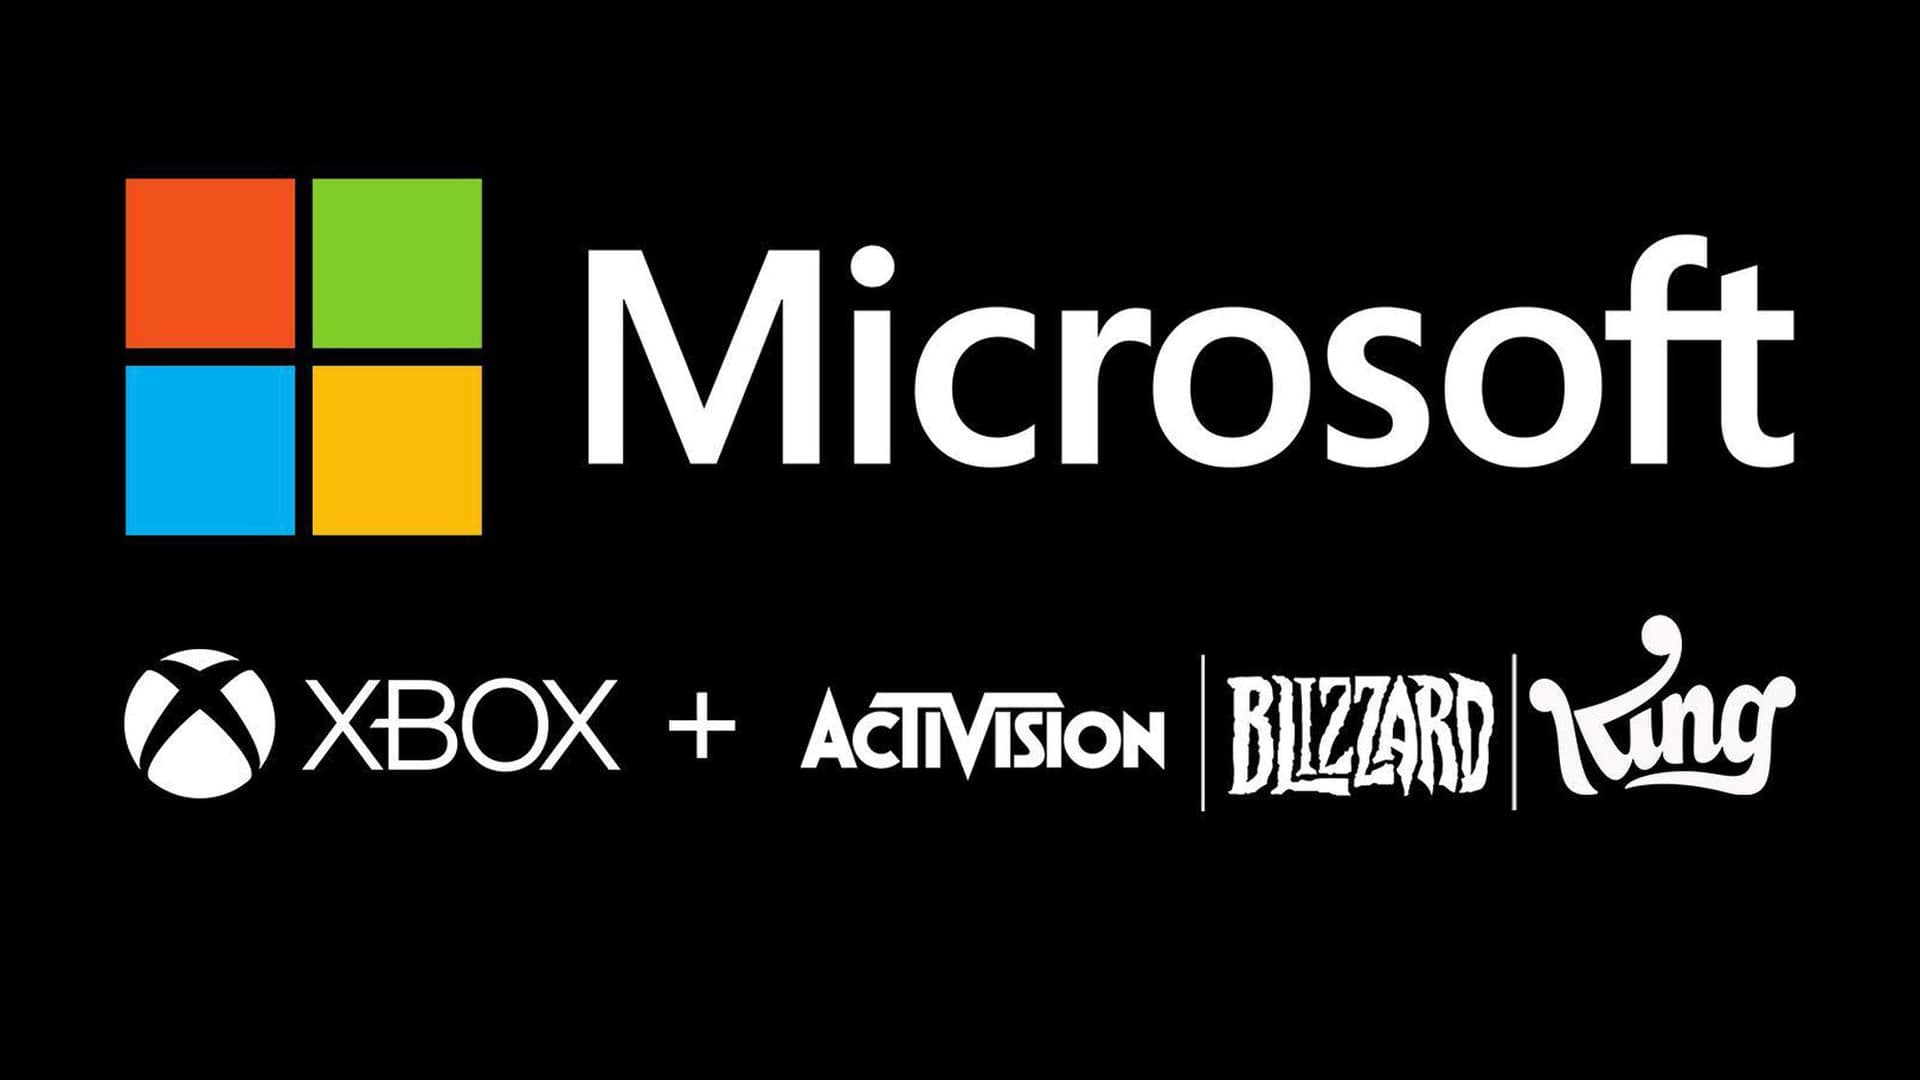 Visual representation of the acquisition deal between Microsoft and Activision Blizzard.